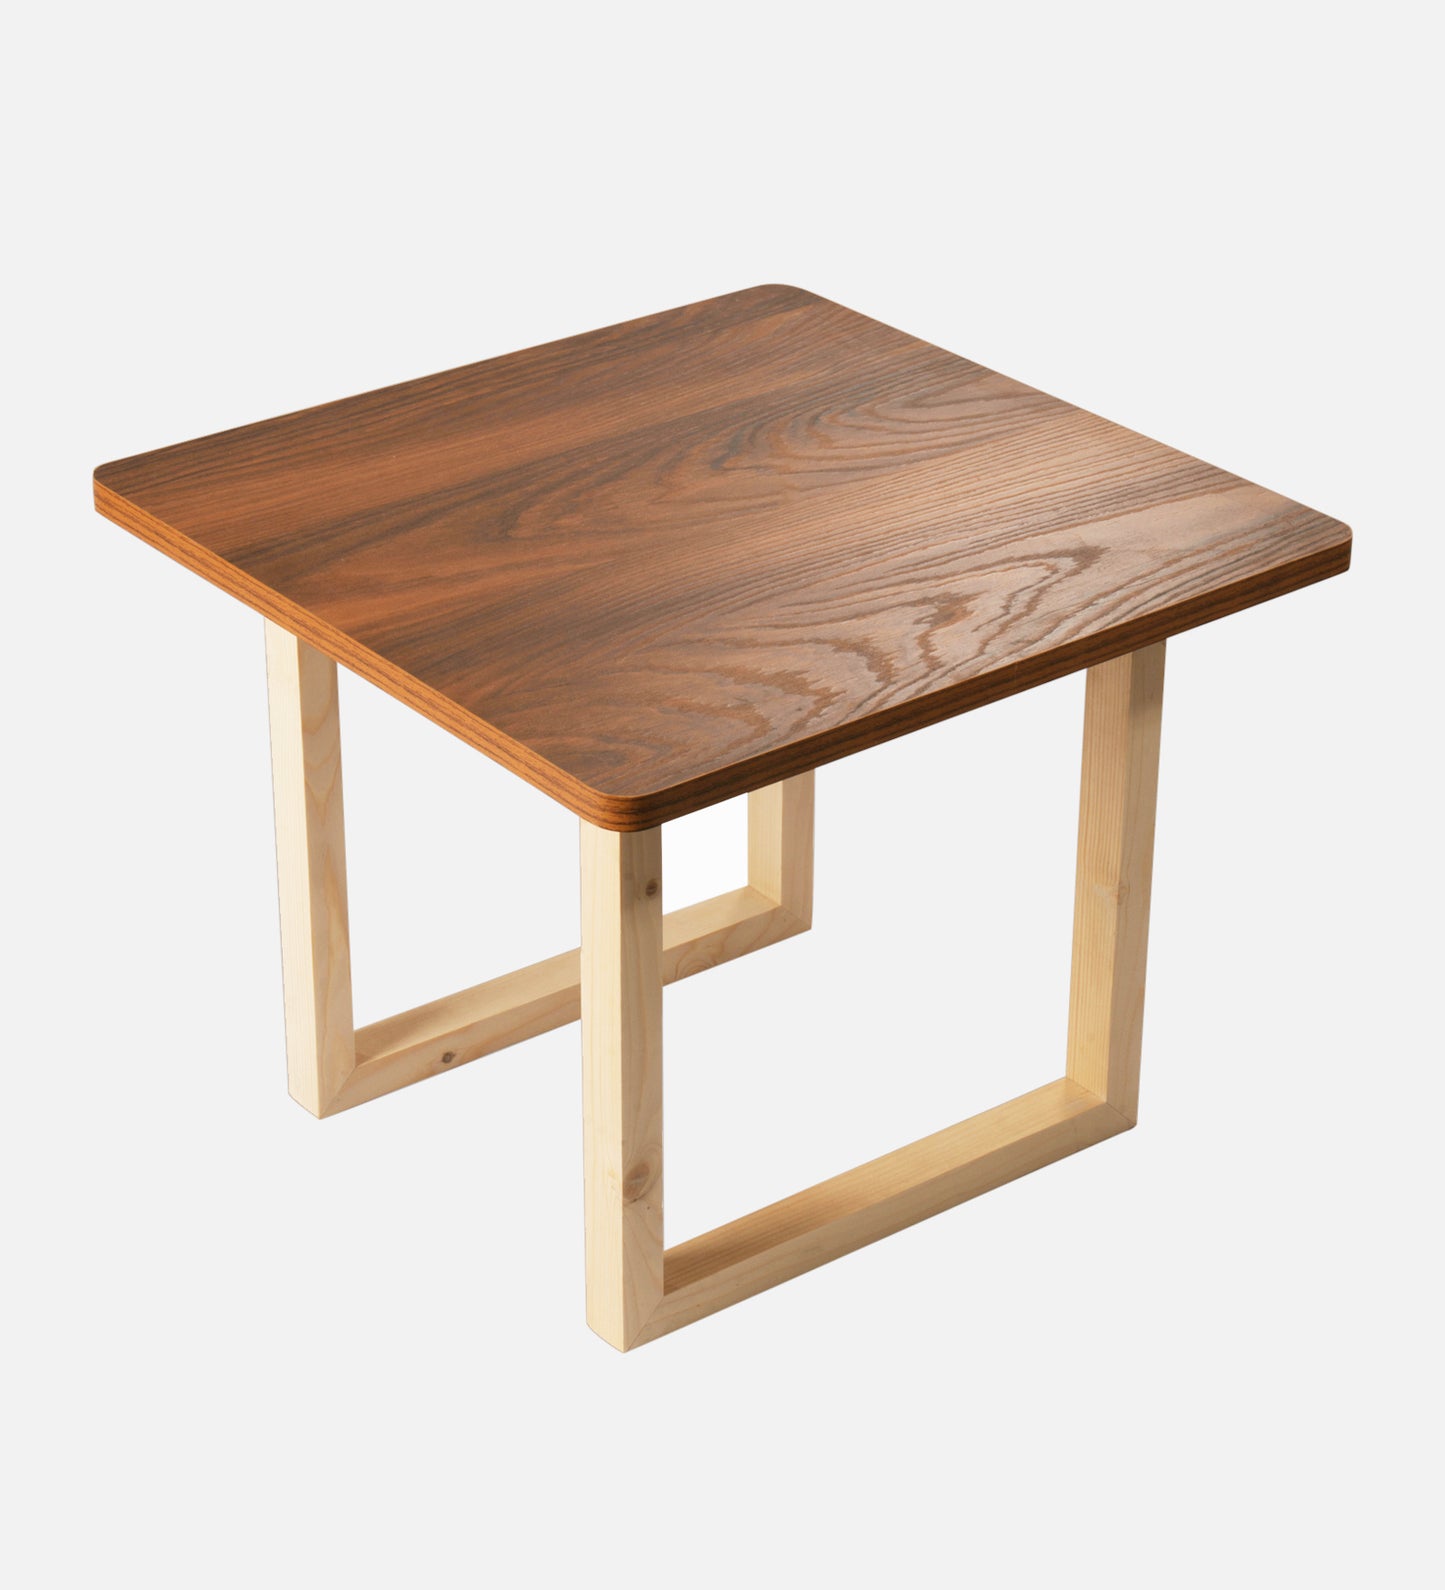 Teak Hues Square Coffee Tables, Wooden Tables, Coffee Tables, Center Tables, Living Room Decor by A Tiny Mistake